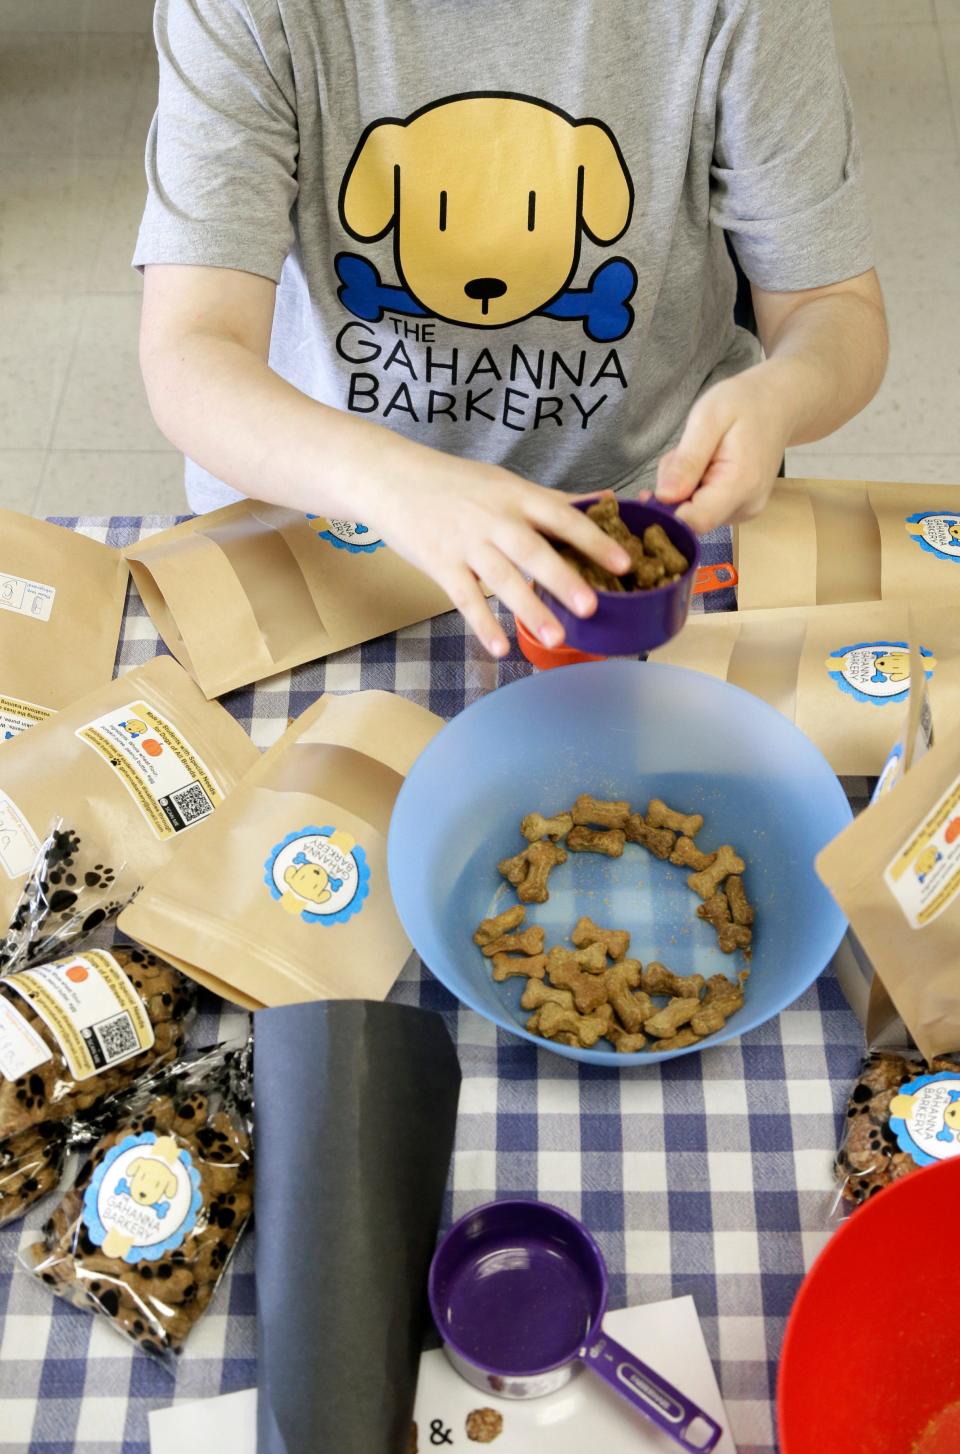 Sara Zeches, 16, packages dog treats at Gahanna Lincoln High School. Students in the school's special education program make, bake, package, label, weigh and sell the treats at part of the Gahanna Barkery.